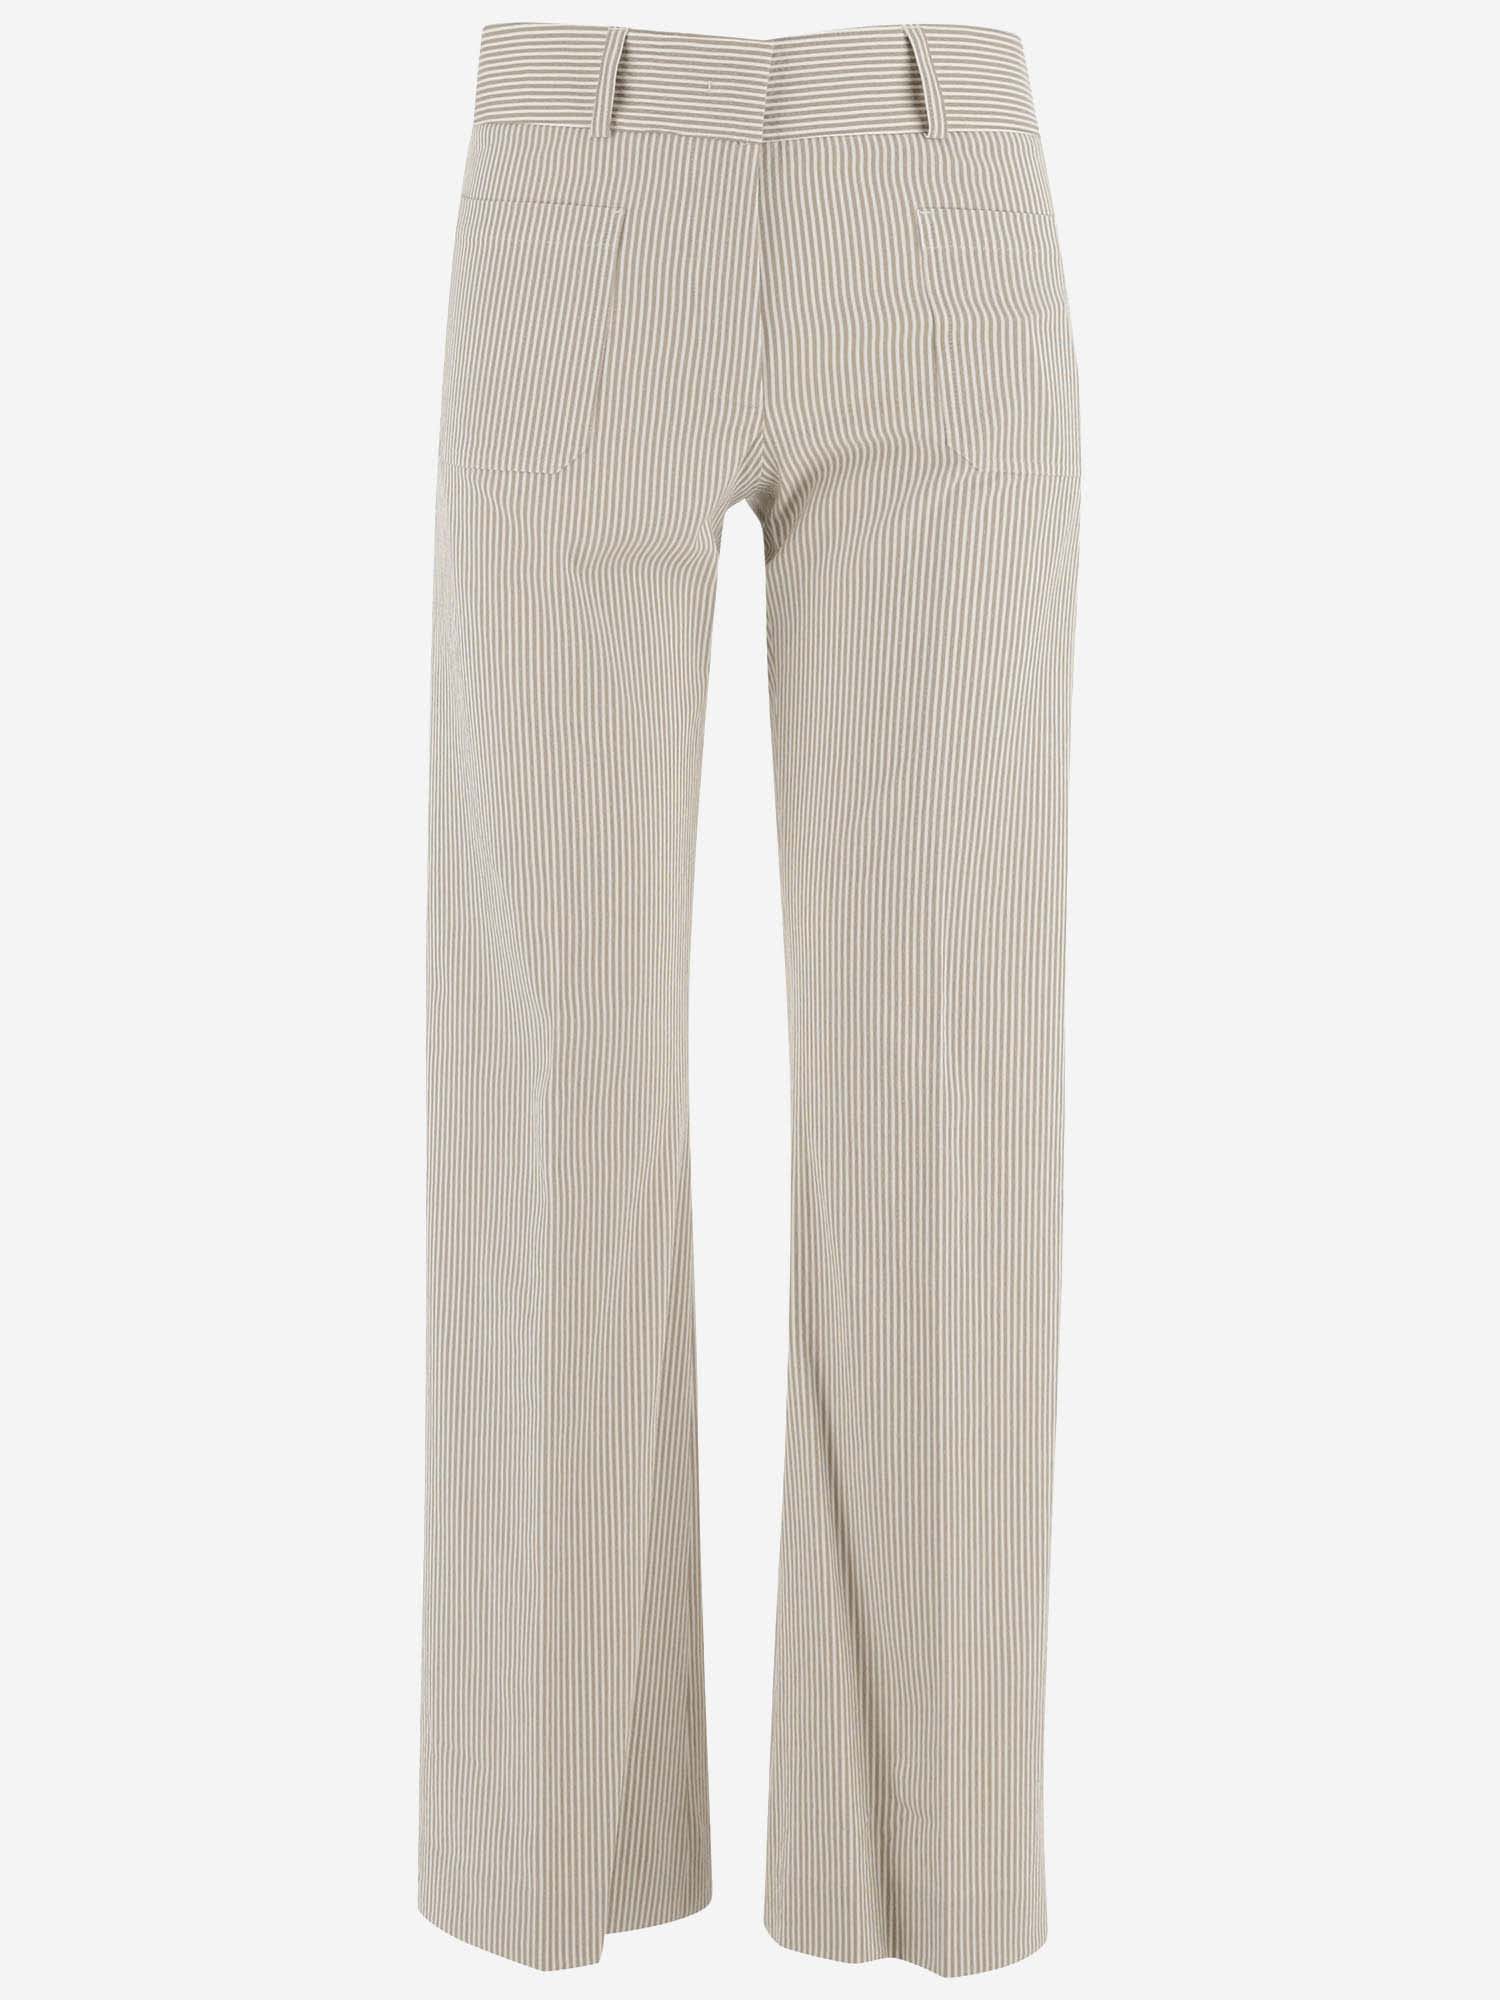 Ql2 Stretch Cotton Wide Leg Pants In Sand